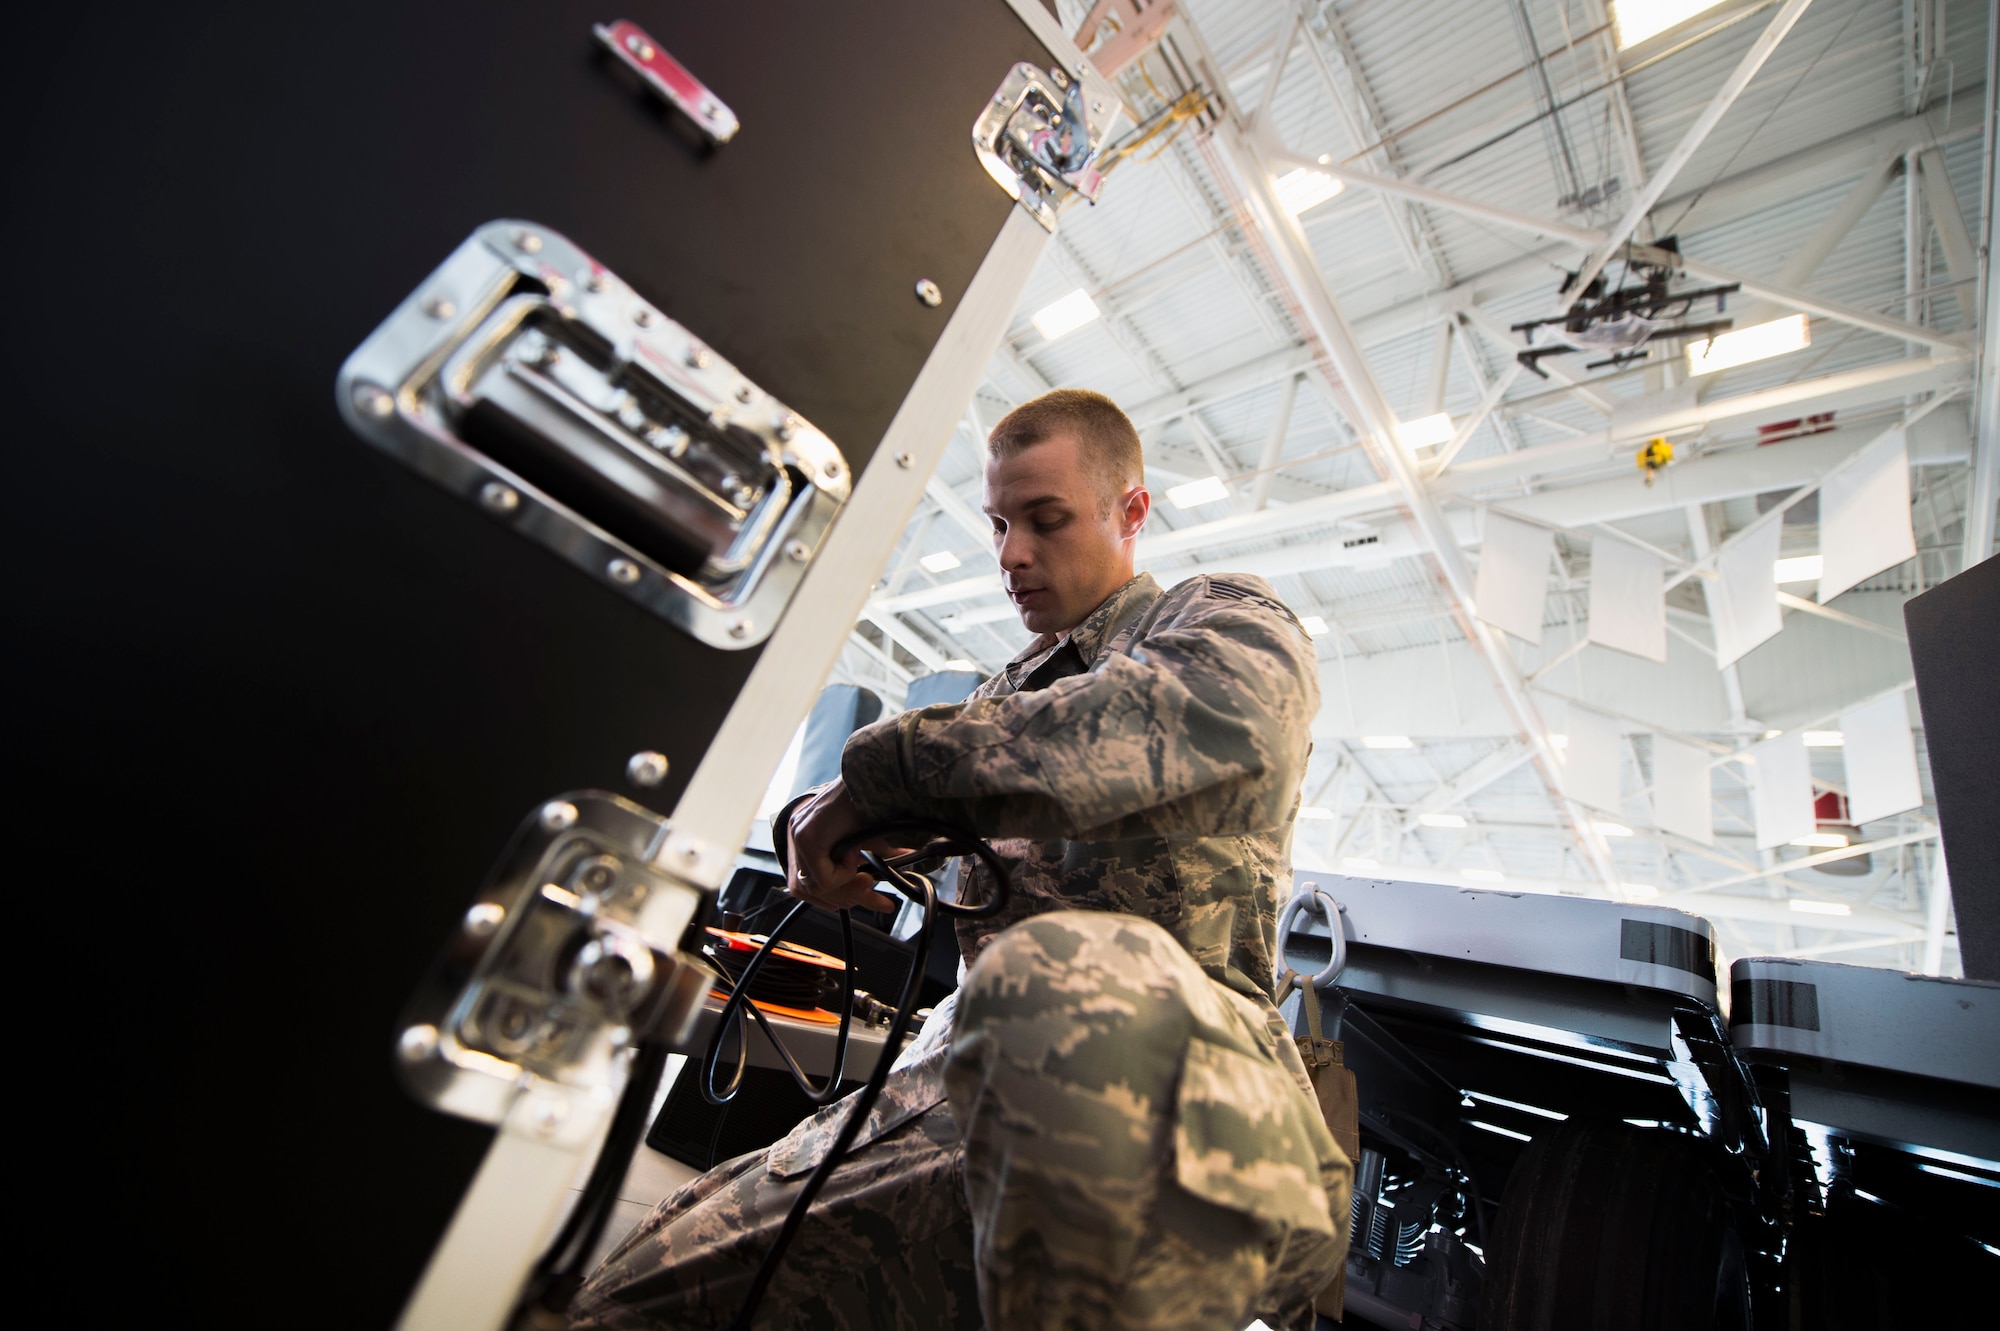 Staff Sgt. Andrew Muhlhahn, a radio frequency systems journeyman with the 1st Special Operations Communications Squadron, sets up audio equipment for a change of command ceremony at the Freedom Hangar on Hurlburt Field, Fla., July 15, 2016 Airmen from the 1st SOCS are charged with an additional duty to setup audio systems for public address at base functions. (U.S. Air Force photo by Senior Airman Krystal M. Garrett)
